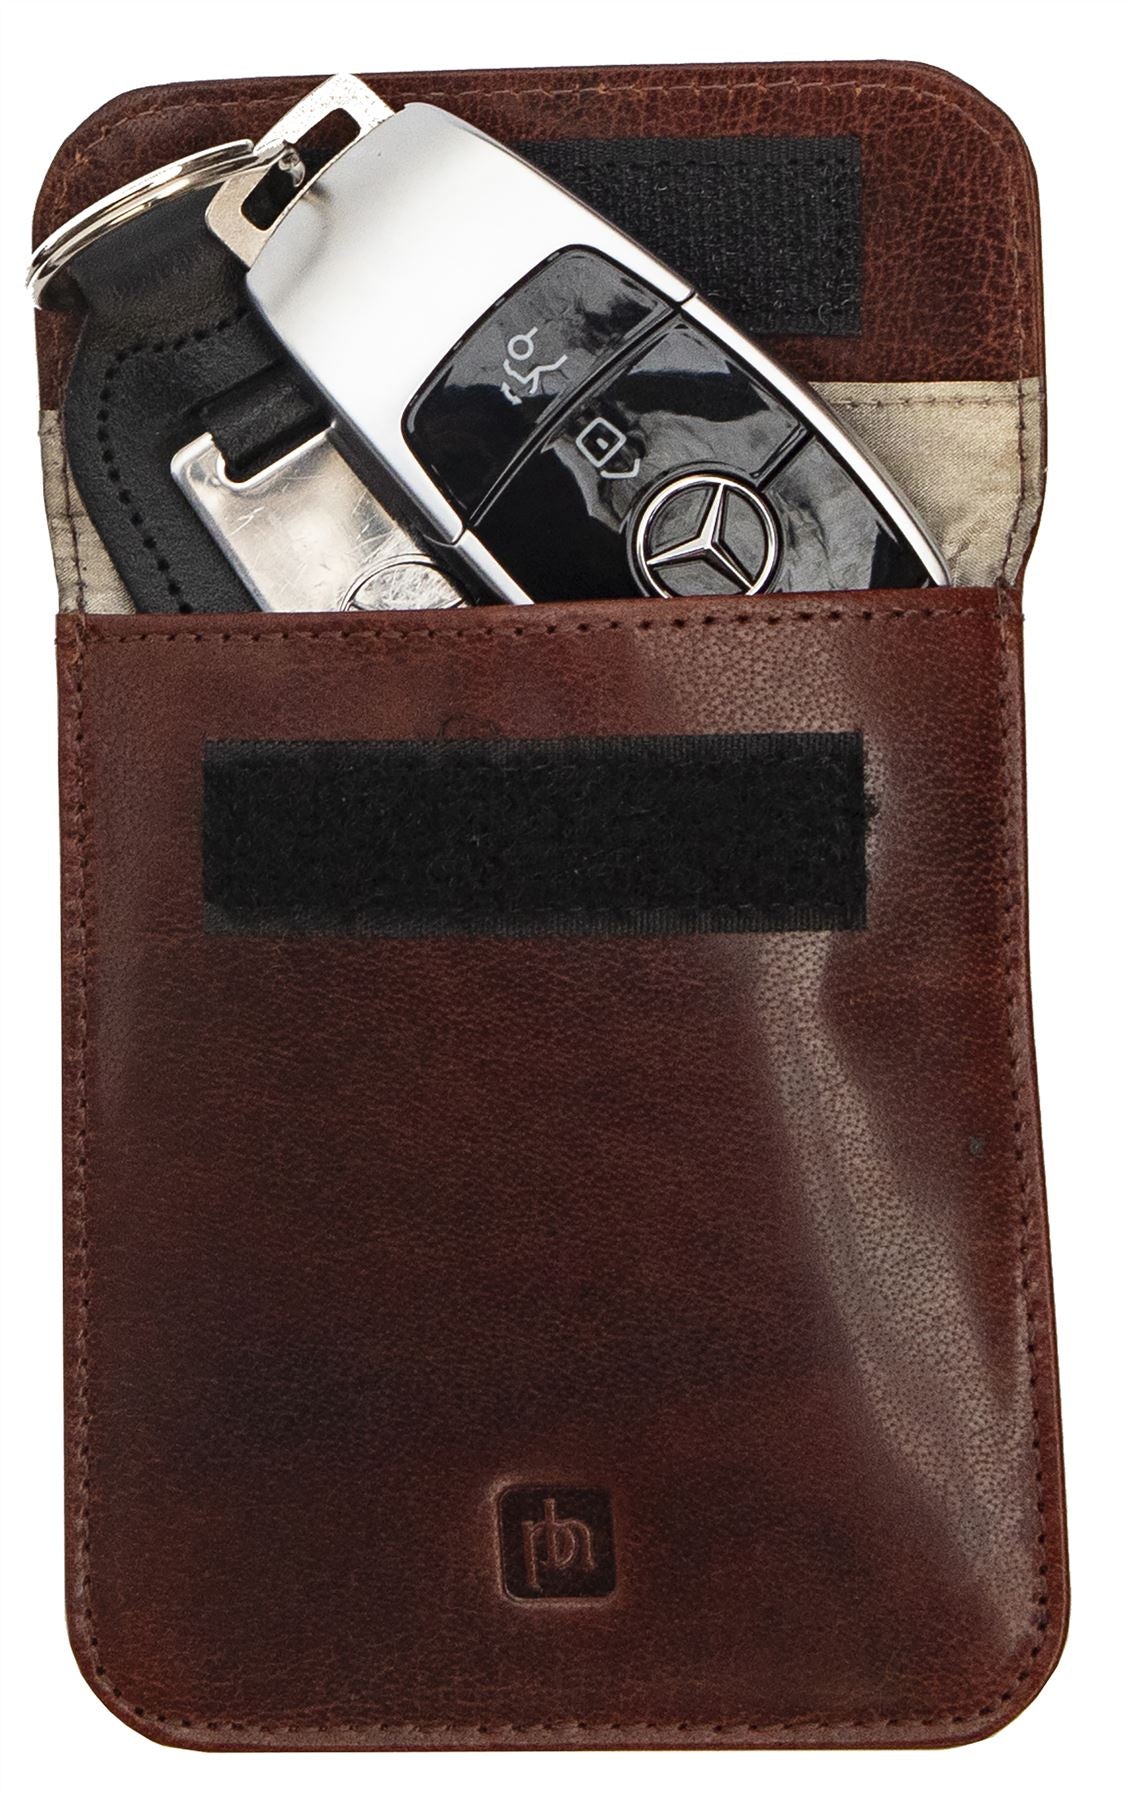 Leather RFID Key Pouch Holder - 4829